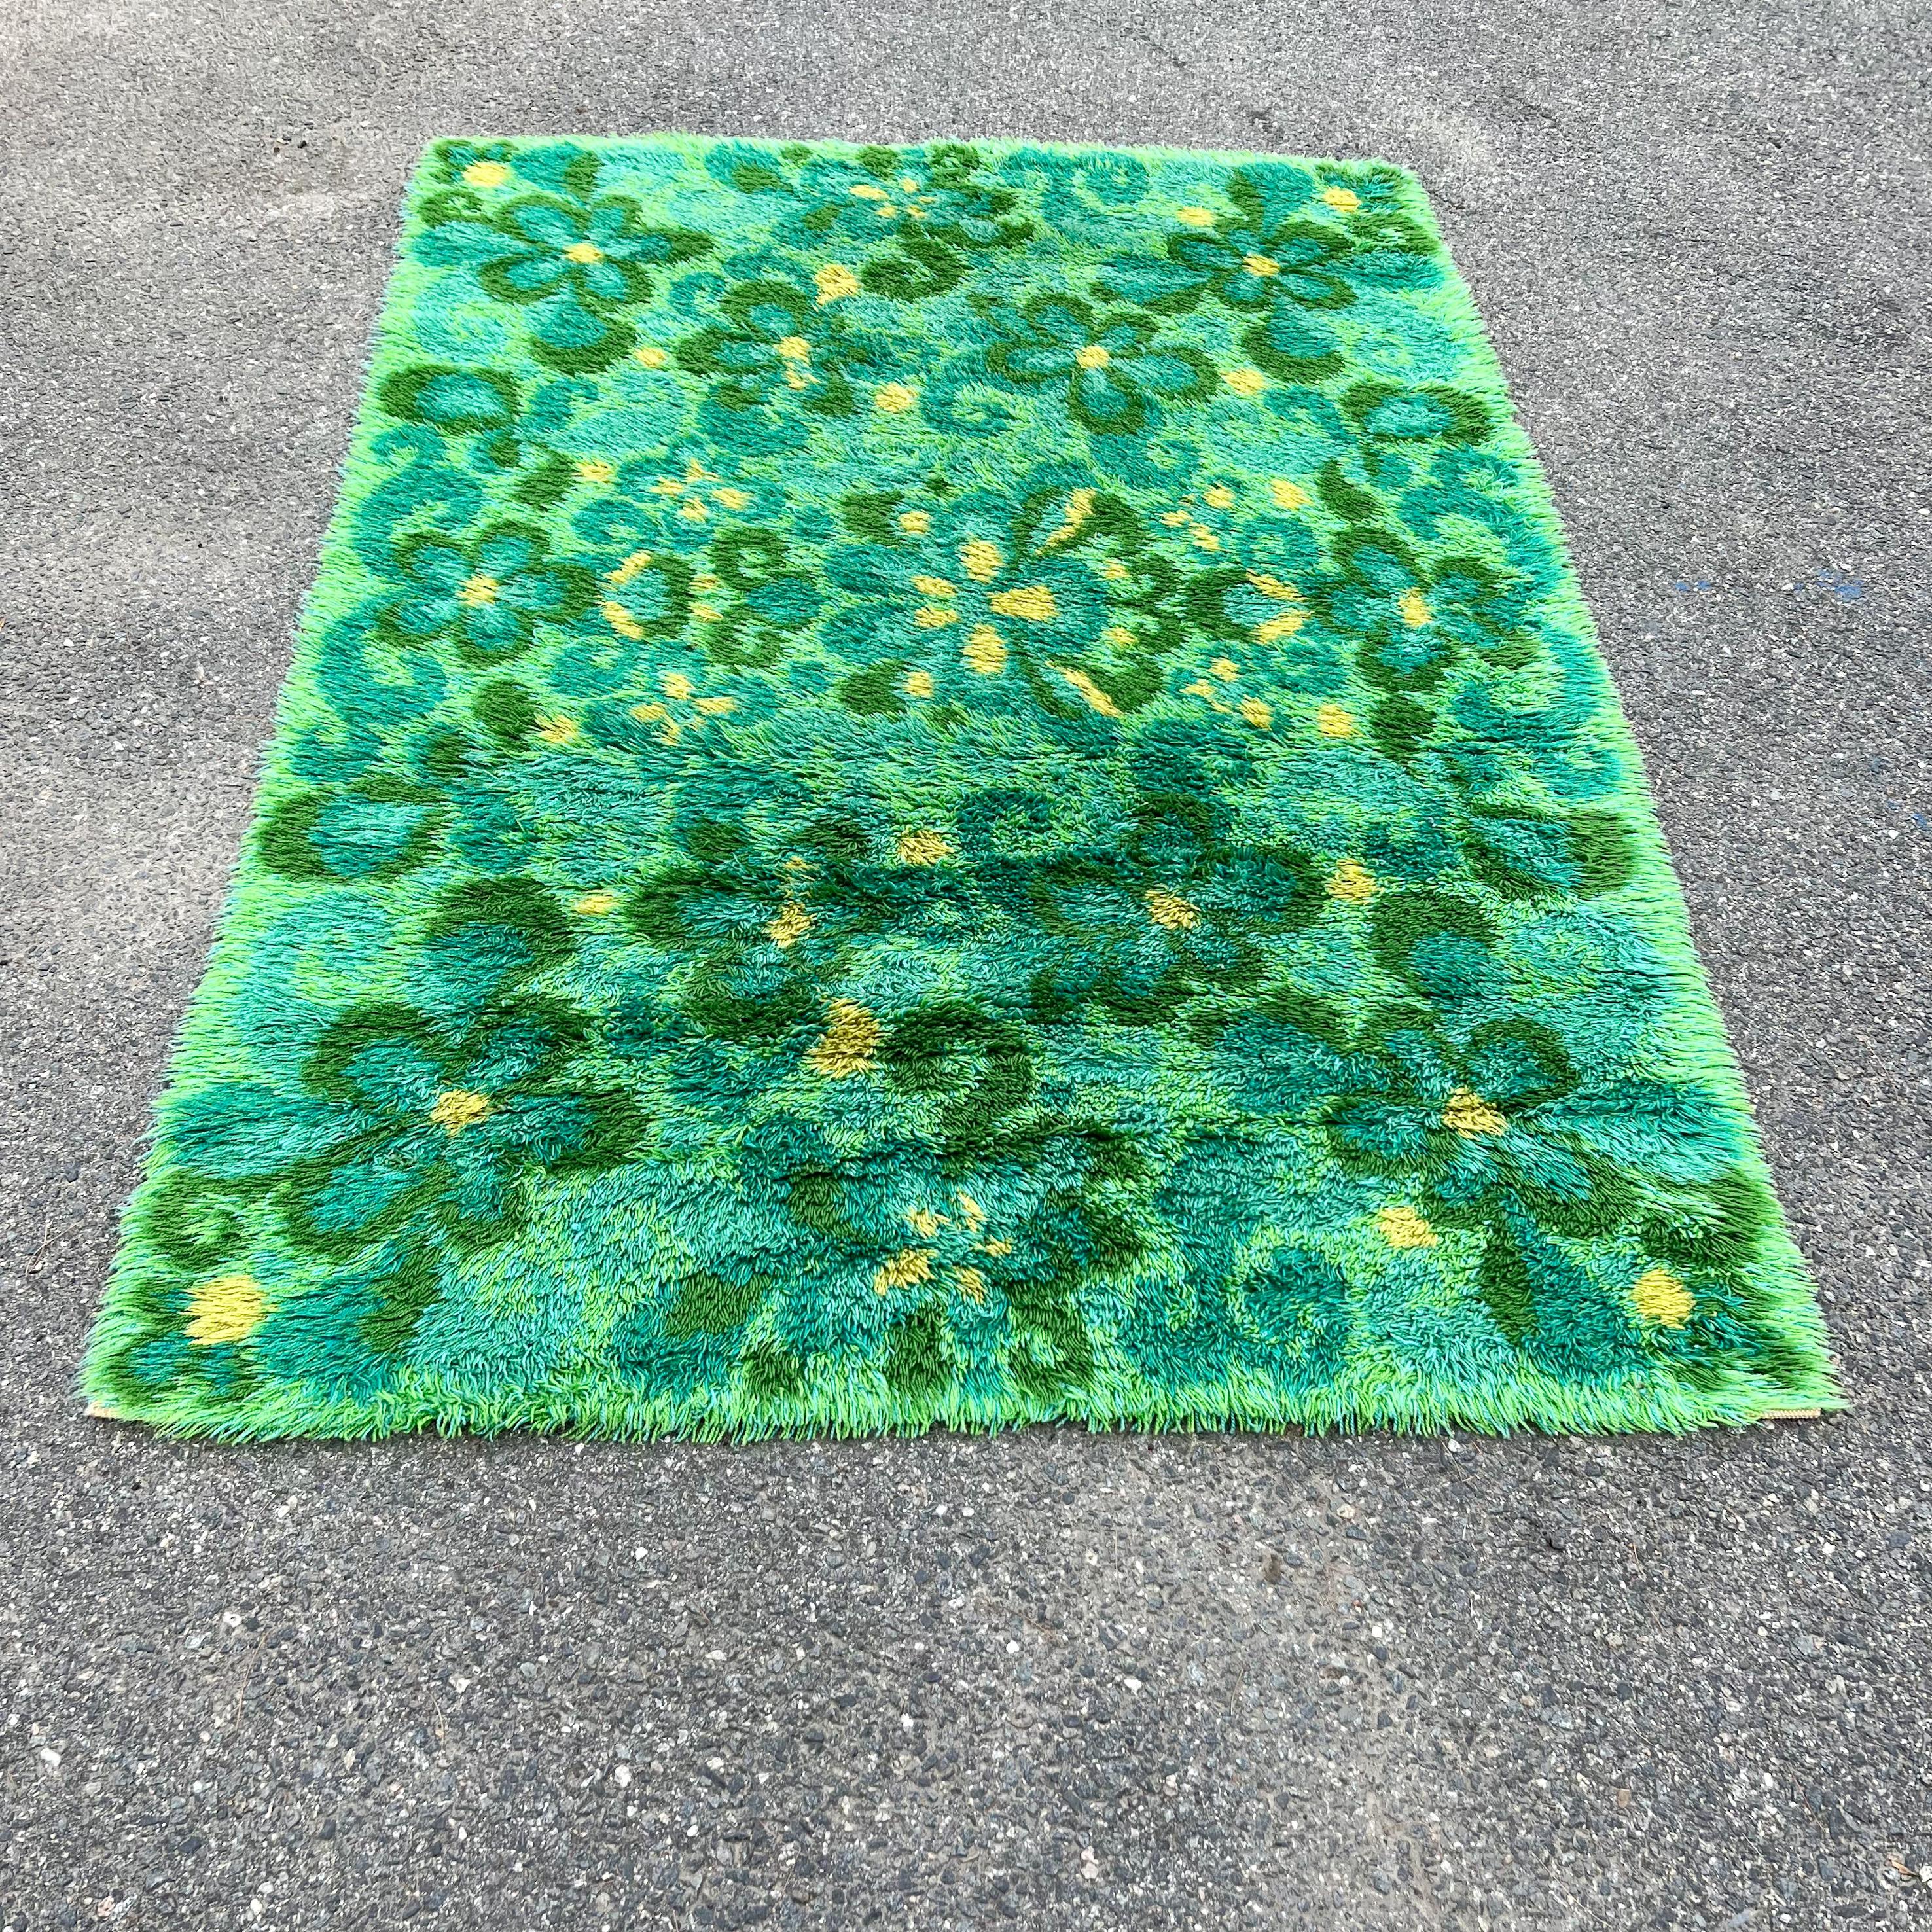 Mid-Century Modern flower patterned green Scandinavian rya rug.


A rya is a traditional Scandinavian wool rug with a long pile of about 1 to 3 inches. They are made using a form of the Ghiordes knot to make the double-sided pile fabric. 

This